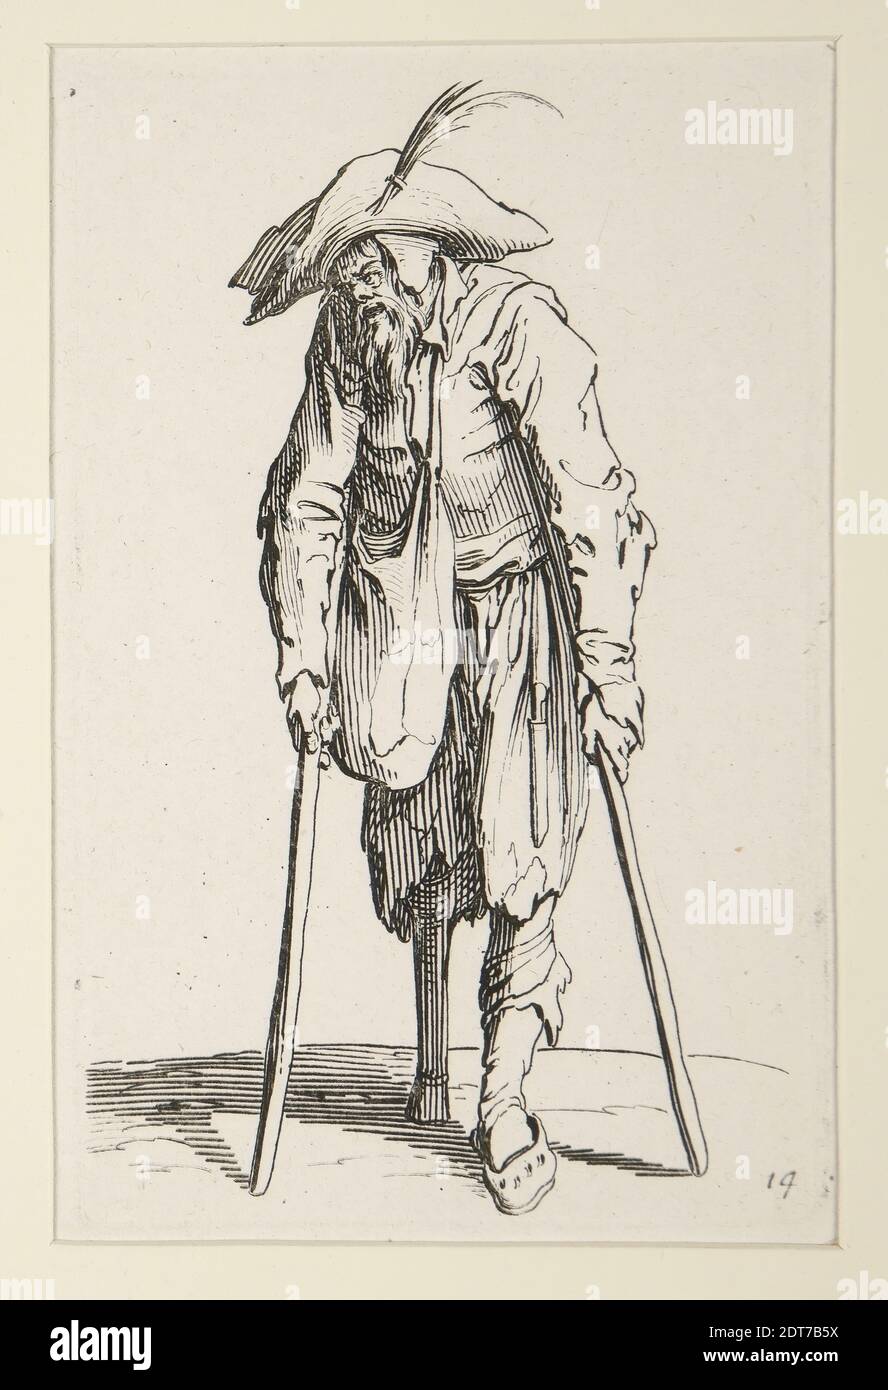 Artist: Jacques Callot, French, 1592–1635, Beggar with a wooden leg, from The Beggars (Le mendiant a la jambe de bois), ca. 1622, Etching, sheet: 13.7 × 8.7 cm (5 3/8 × 3 7/16 in.), French, 17th century, Works on Paper - Prints Stock Photo